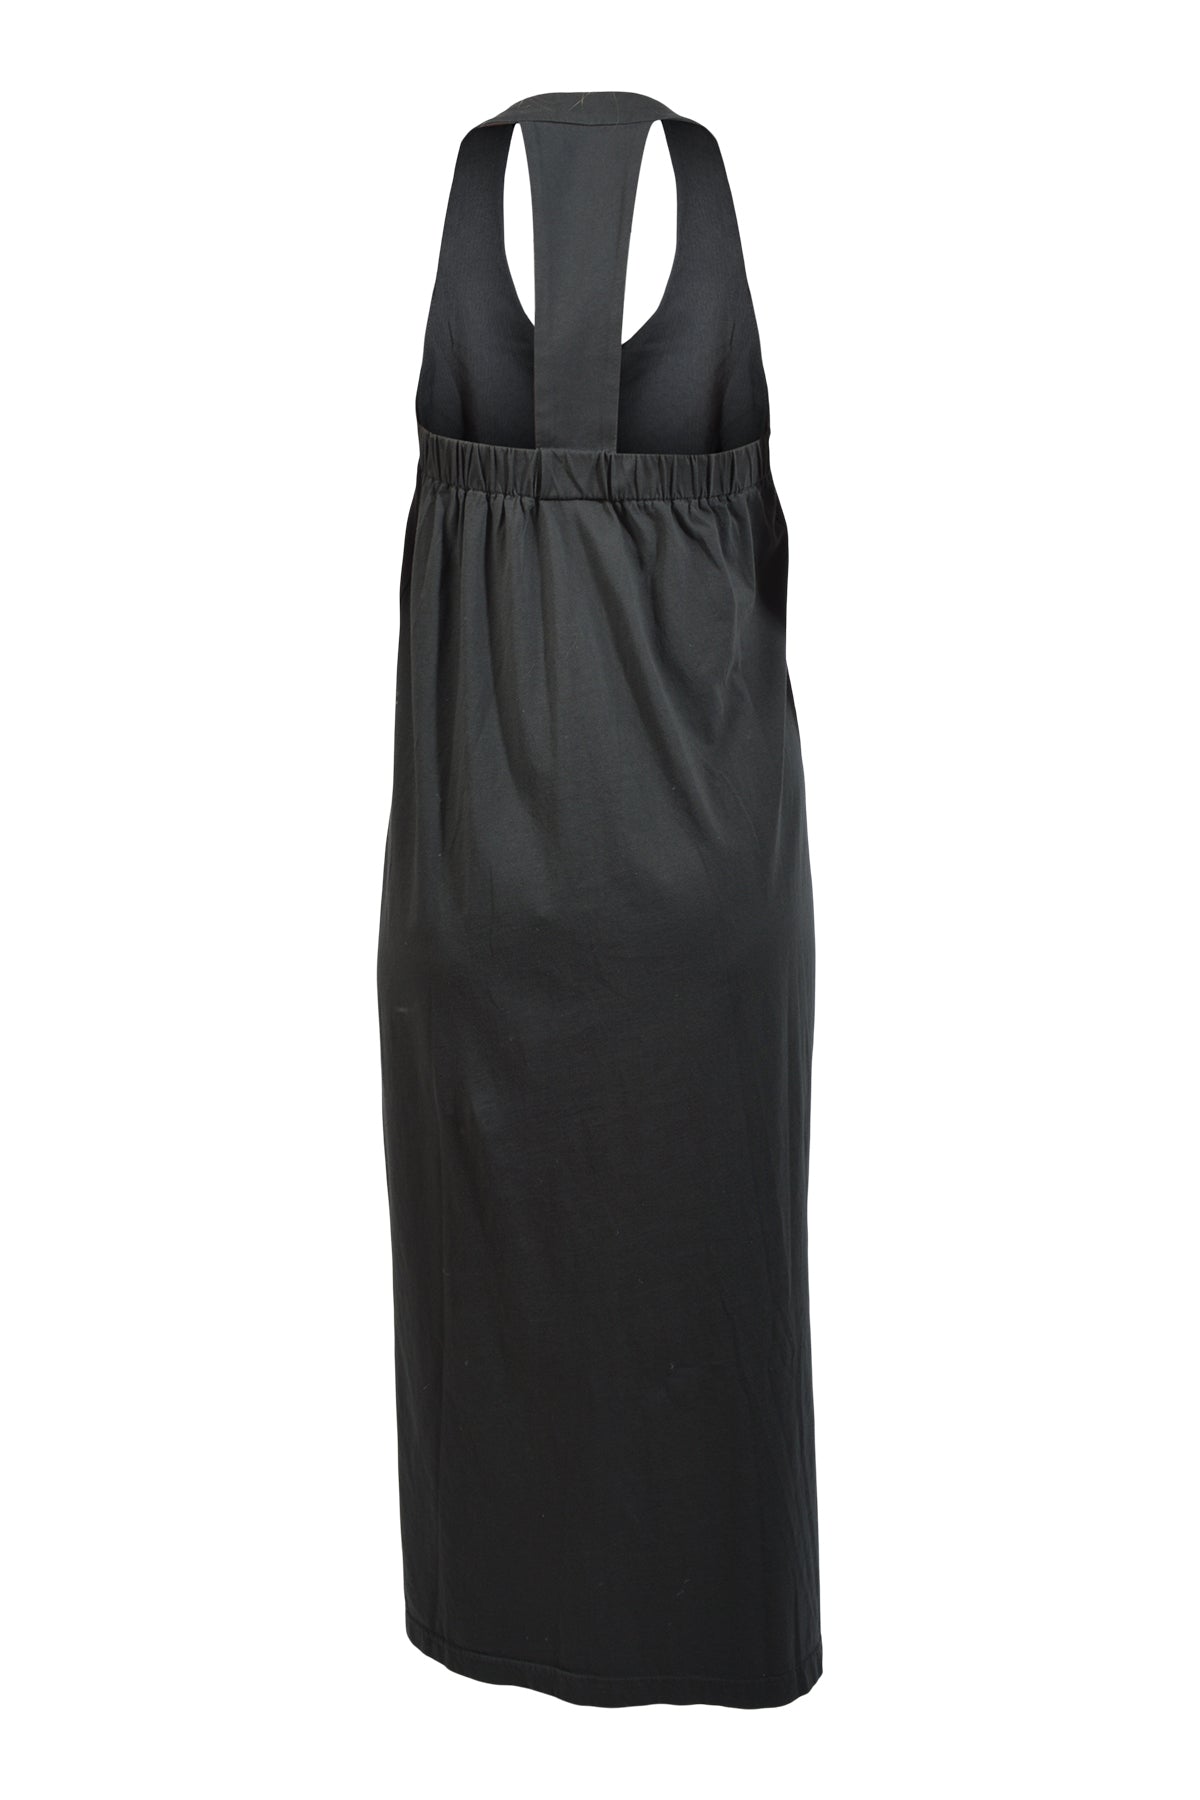 Lotus Eaters Thick dress, Anthracite